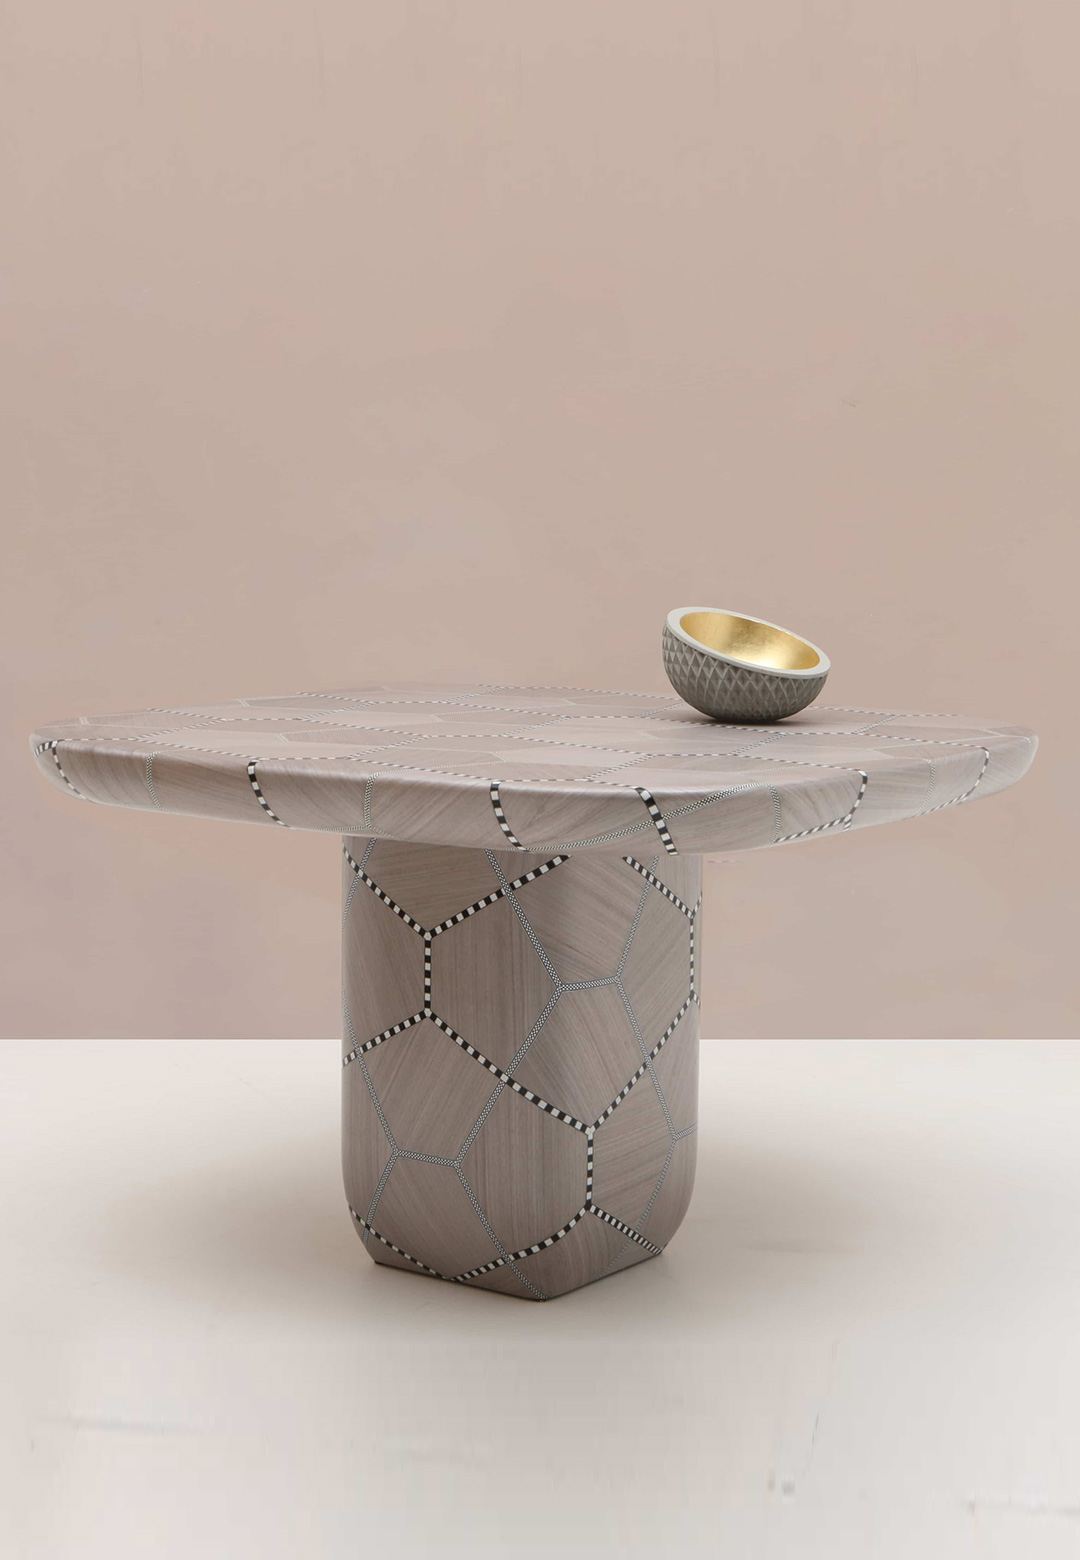 Nada Debs presents Carapace table at CTMP Design auction